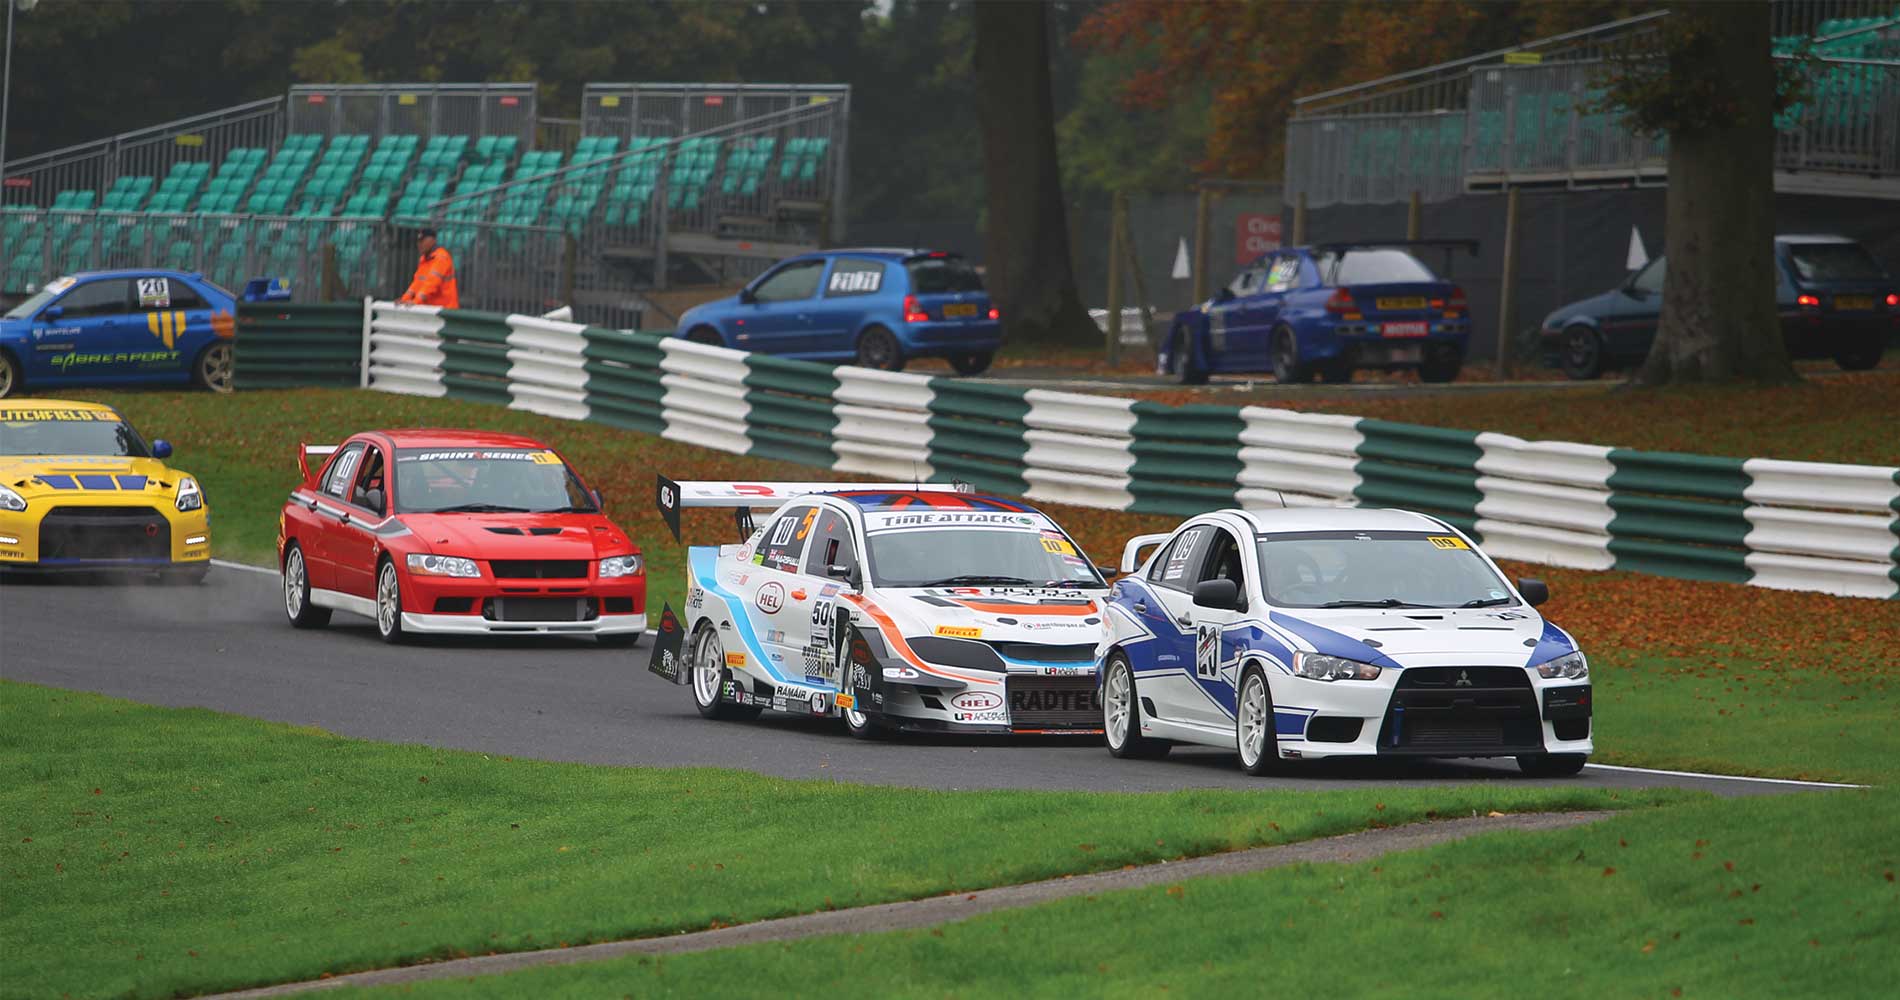 2016-pace-ward-mlr-sprint-series-round-6-cadwell-park-report-motorsportdays-track-day-7